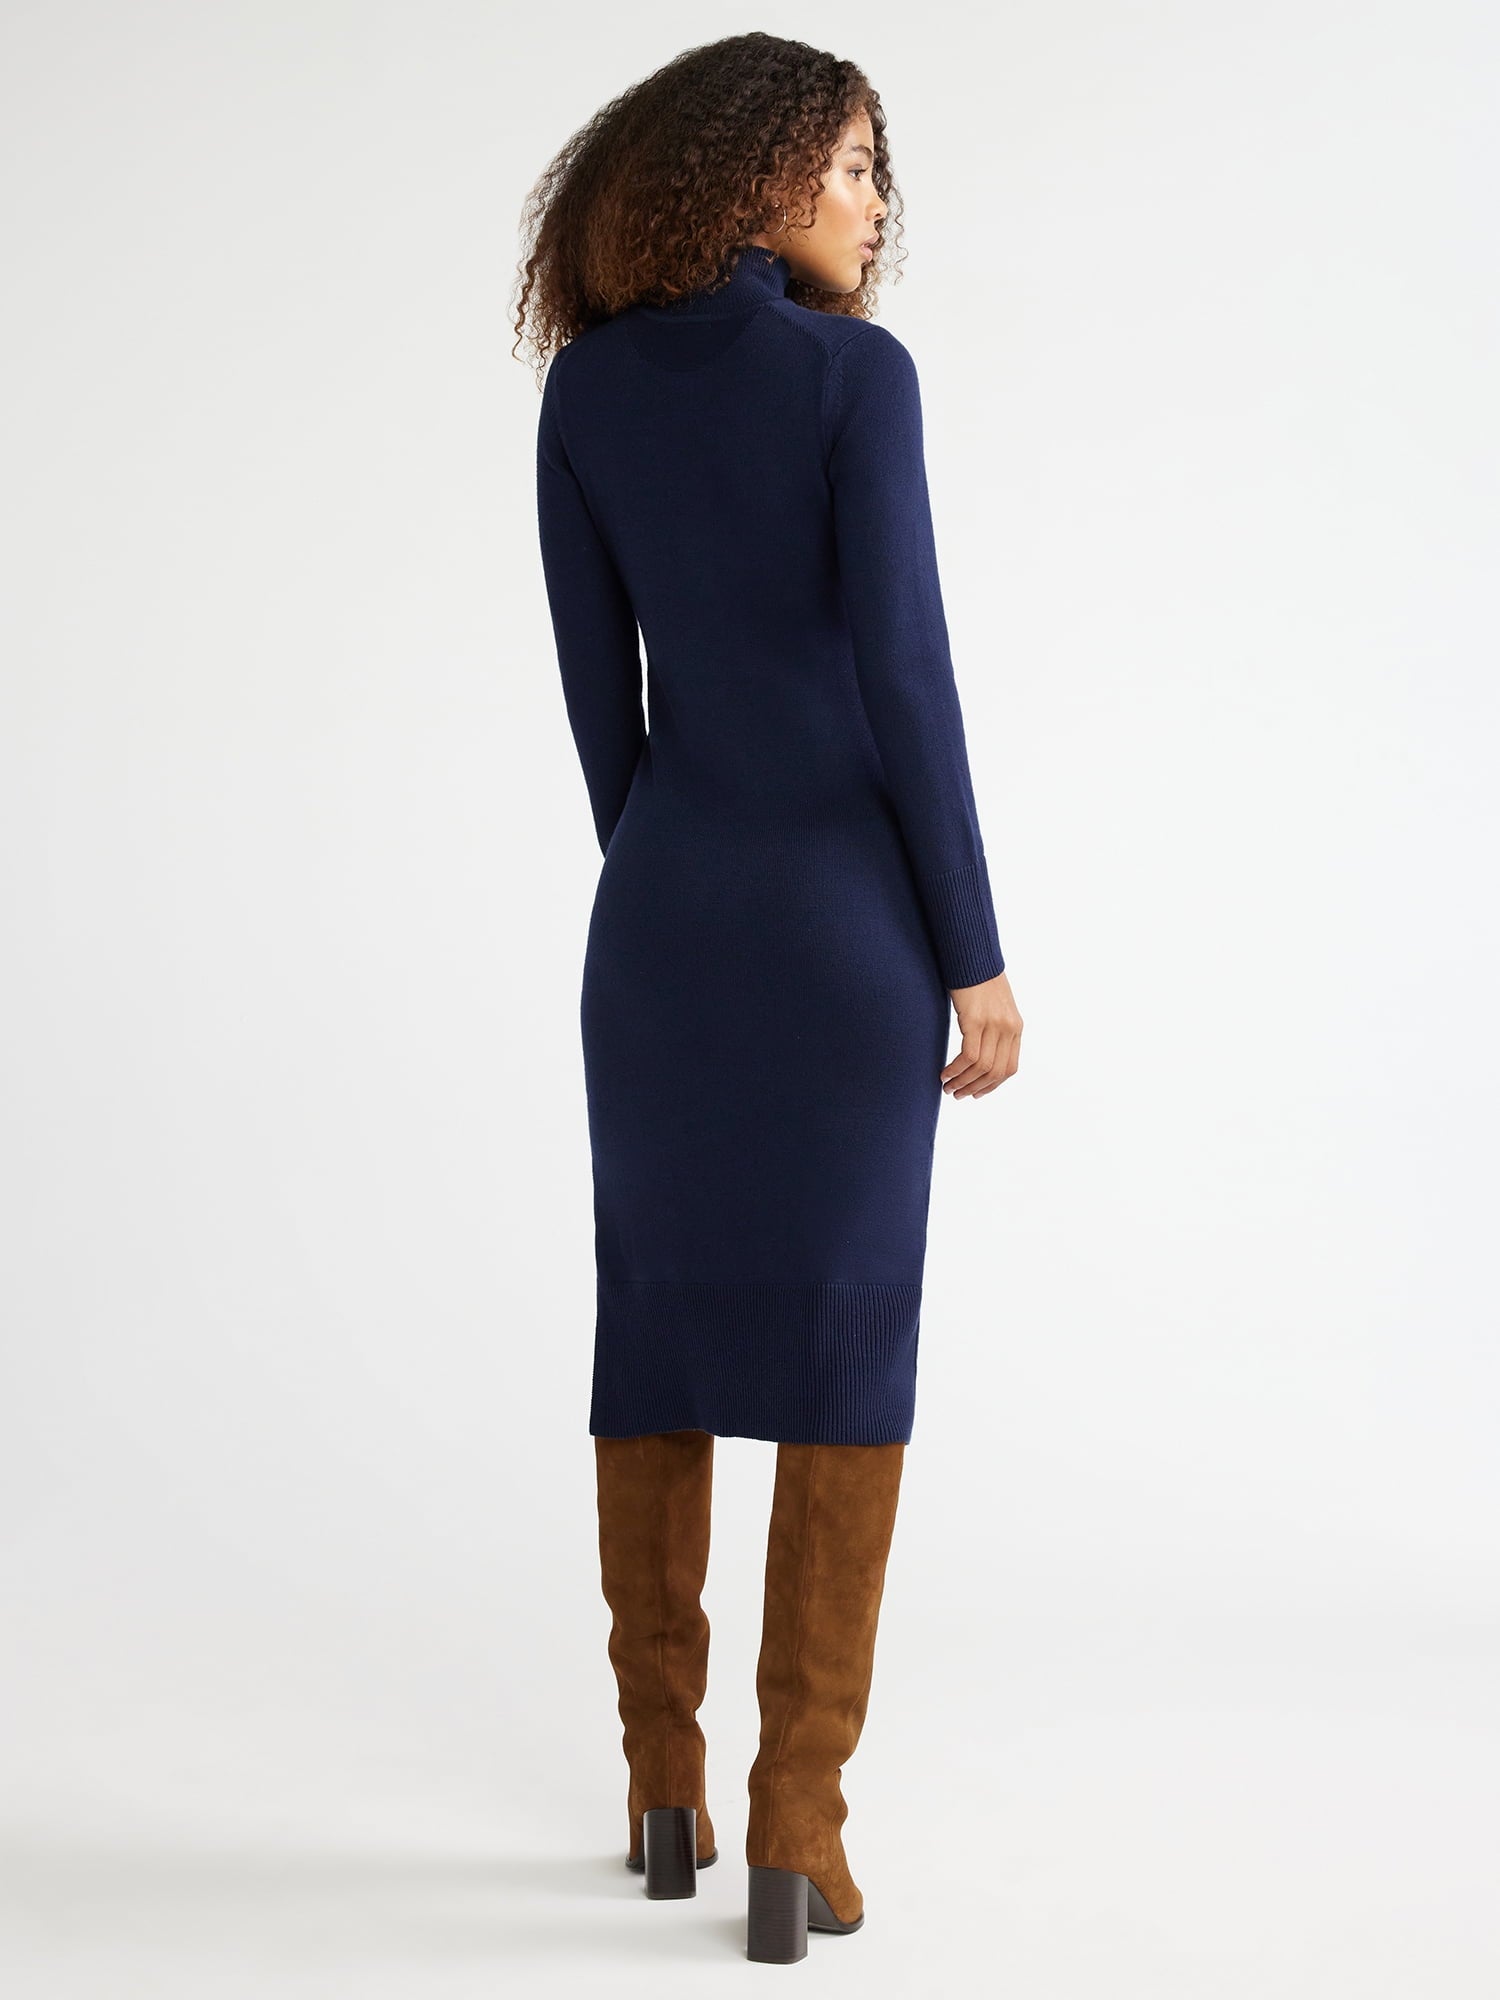 Free Assembly Women’s Turtleneck Sweater Midi Dress with Long Sleeves, Sizes XS-XXXL - image 9 of 10